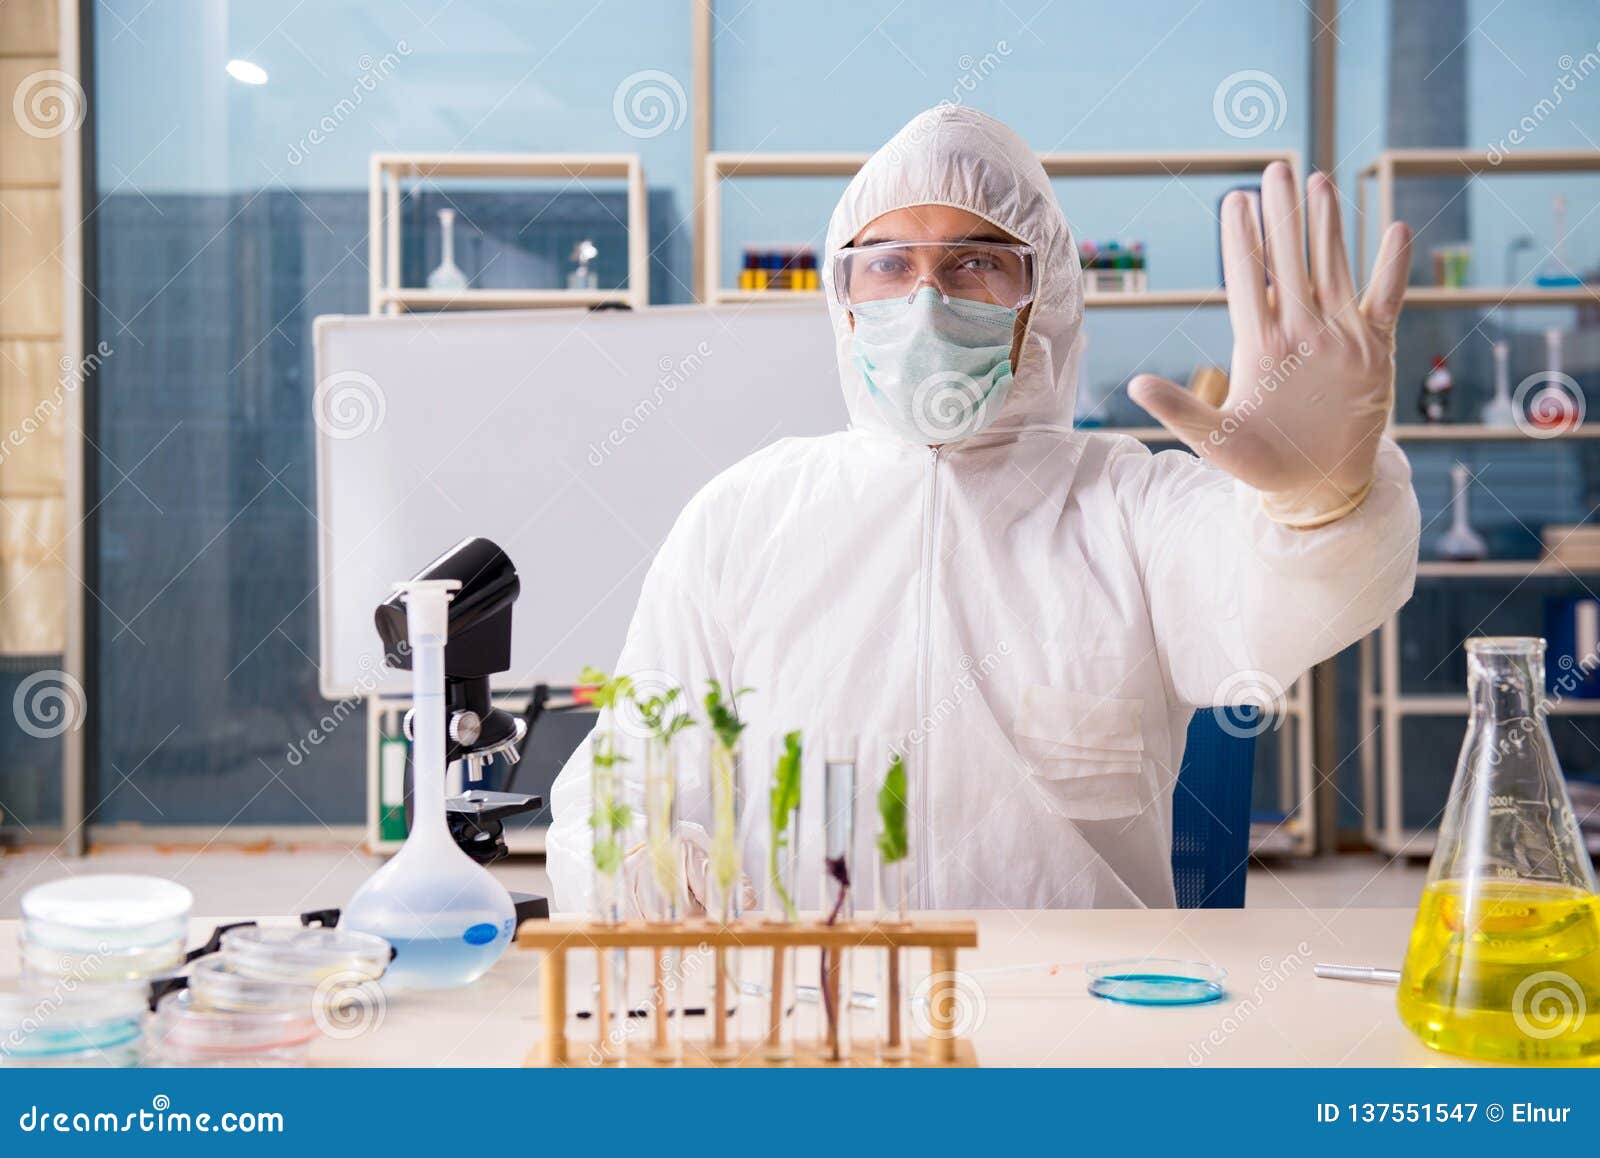 The Male Biotechnology Scientist Chemist Working in the Lab Stock Image